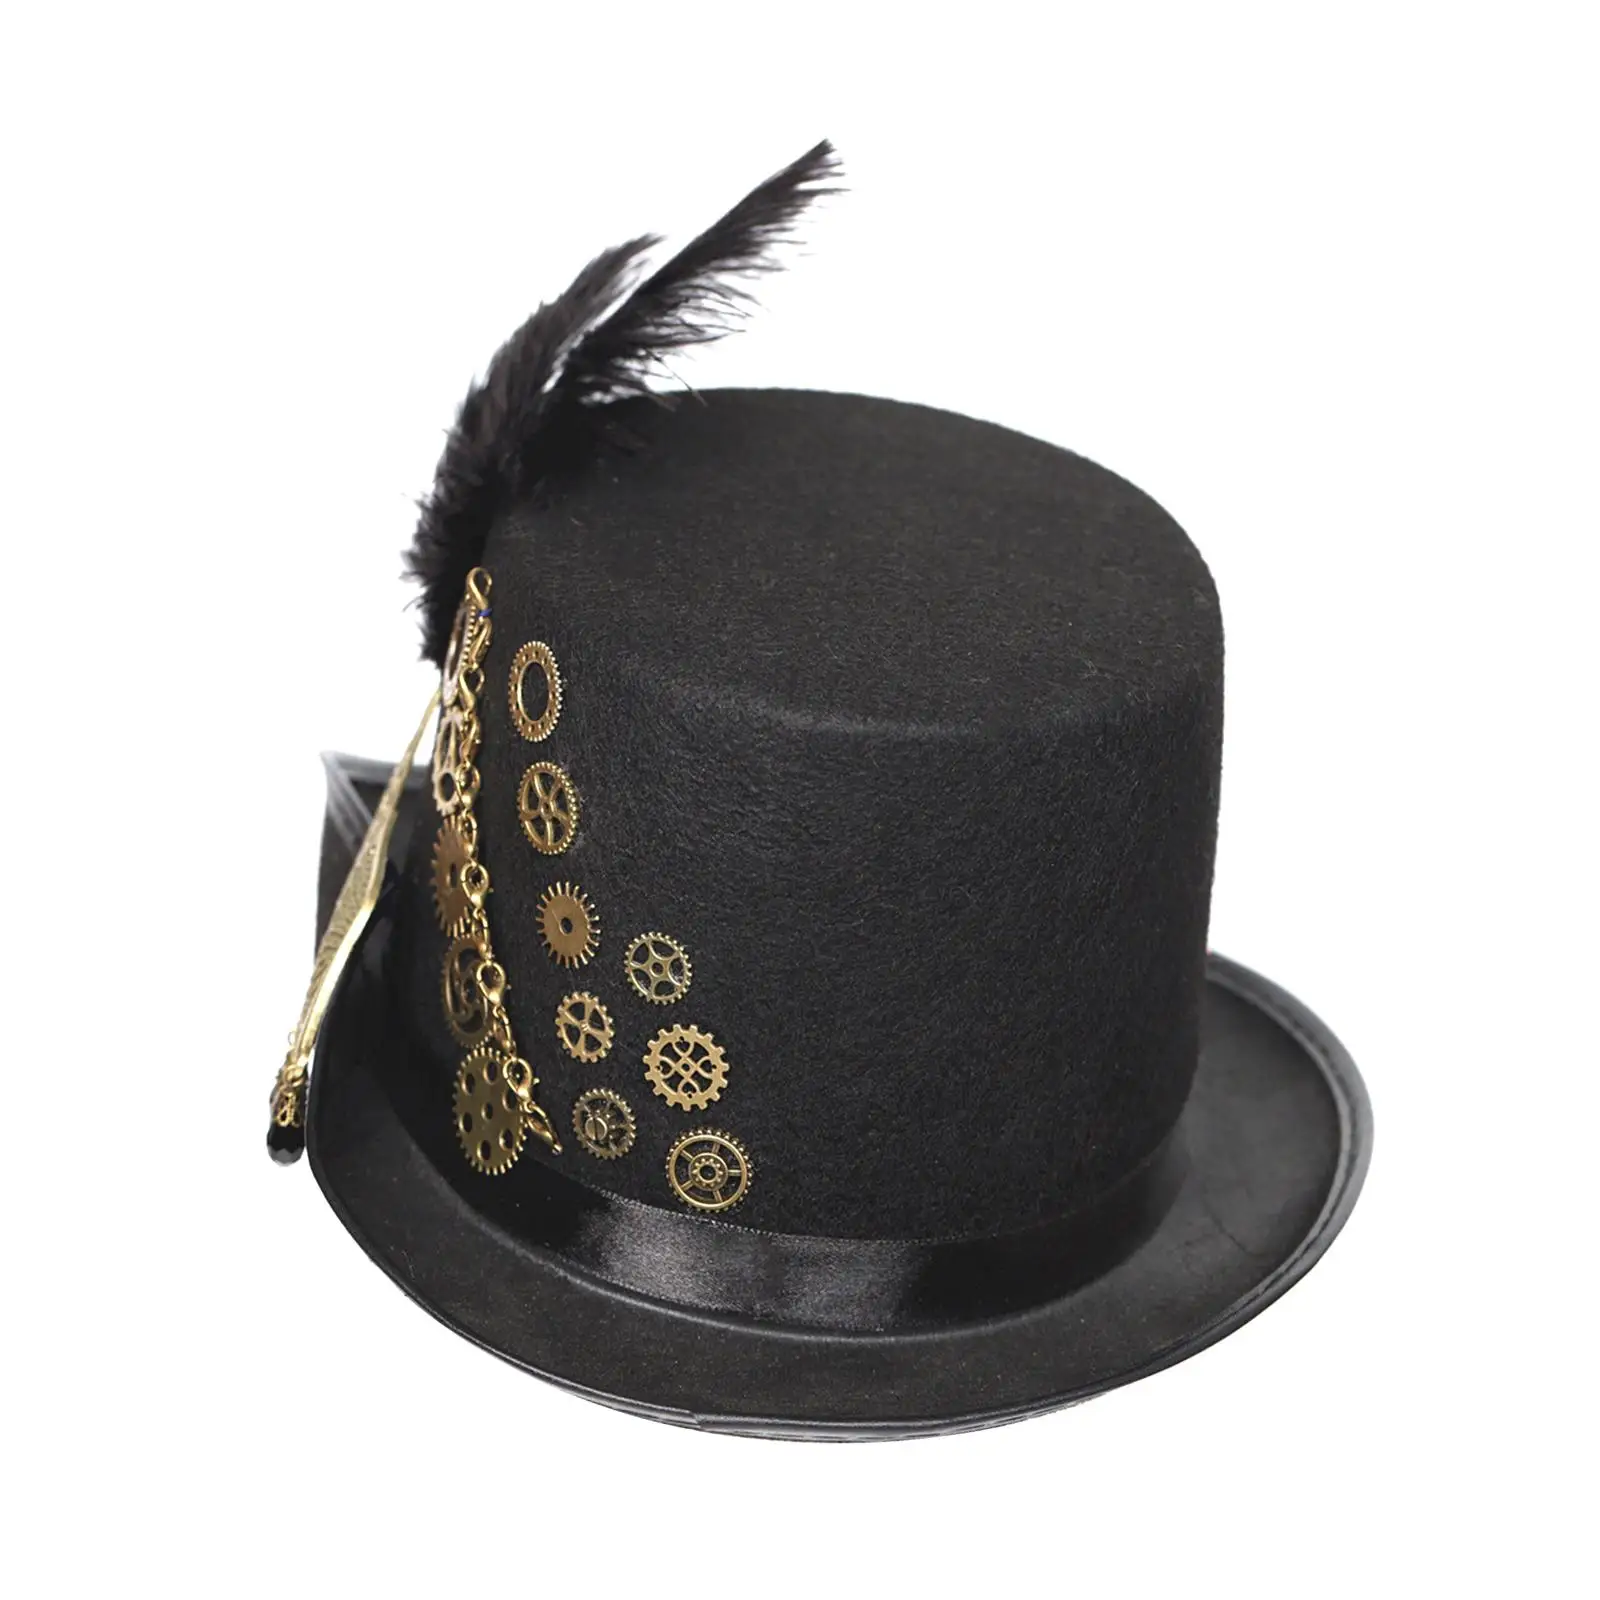 Vintage Steampunk Hat with Wing, Gears Black Top Hat Elegant Gothic Accessories Thick Felt Material for Men Women Durable Gift